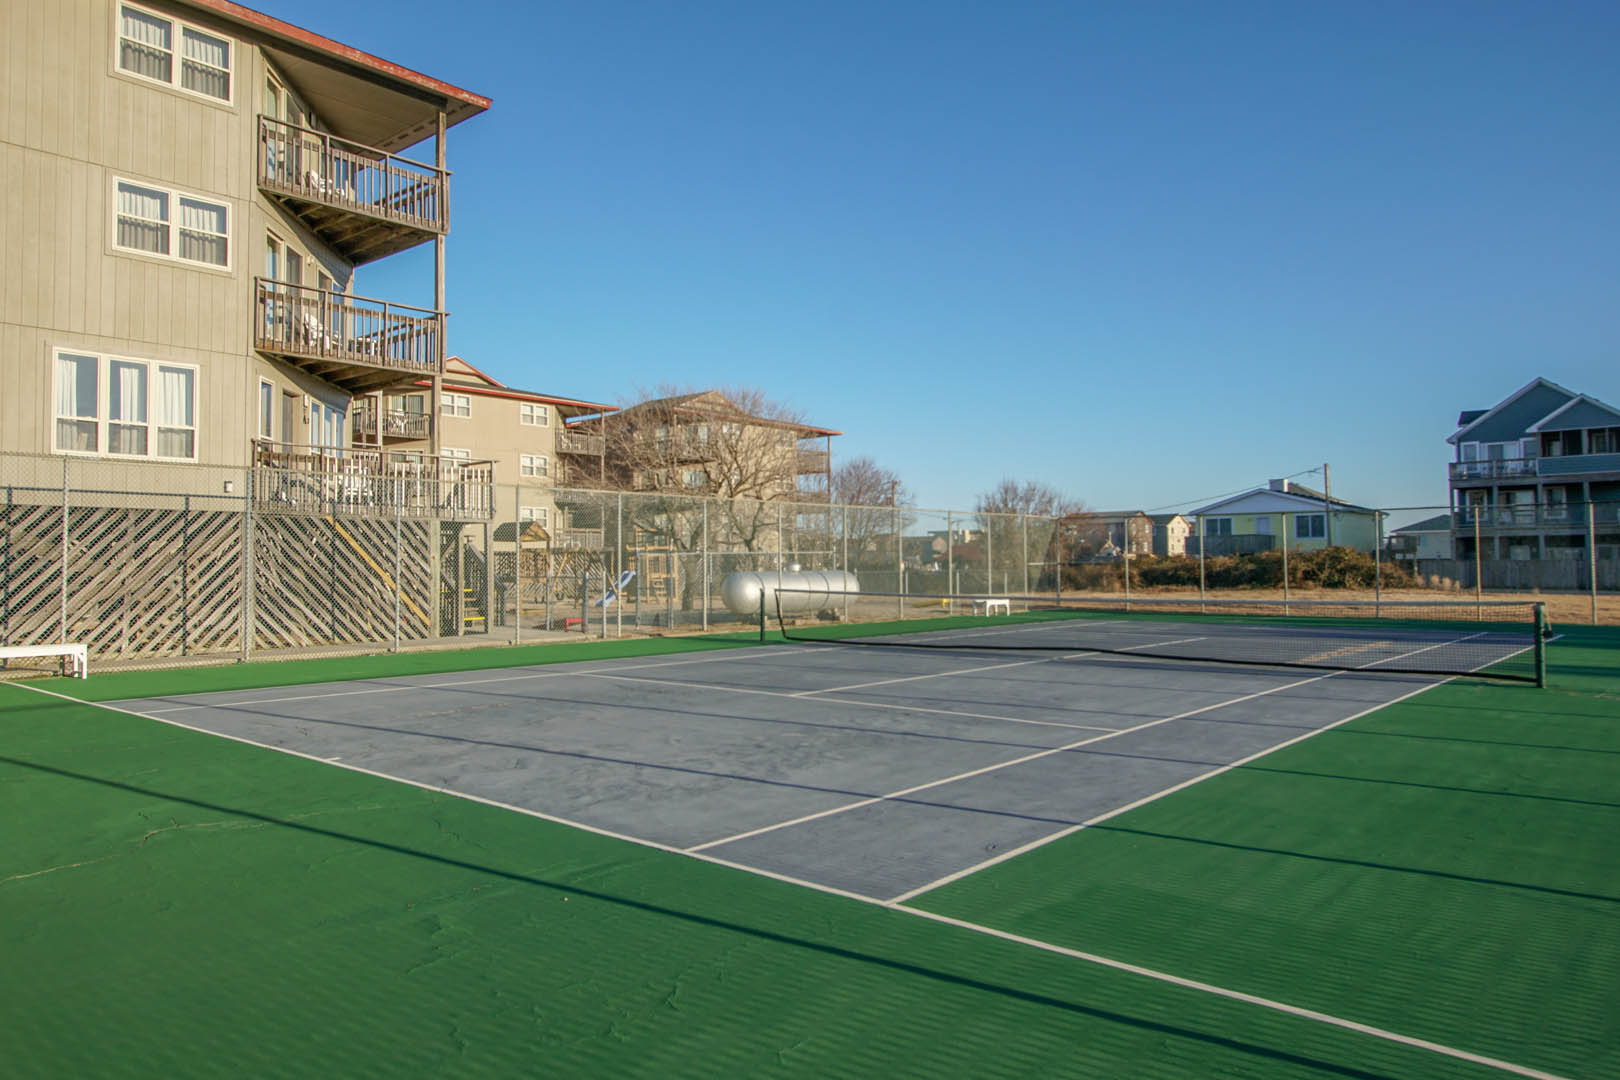 A spacious outdoor tennis court at VRI's Outer Banks Beach Club in North Carolina.